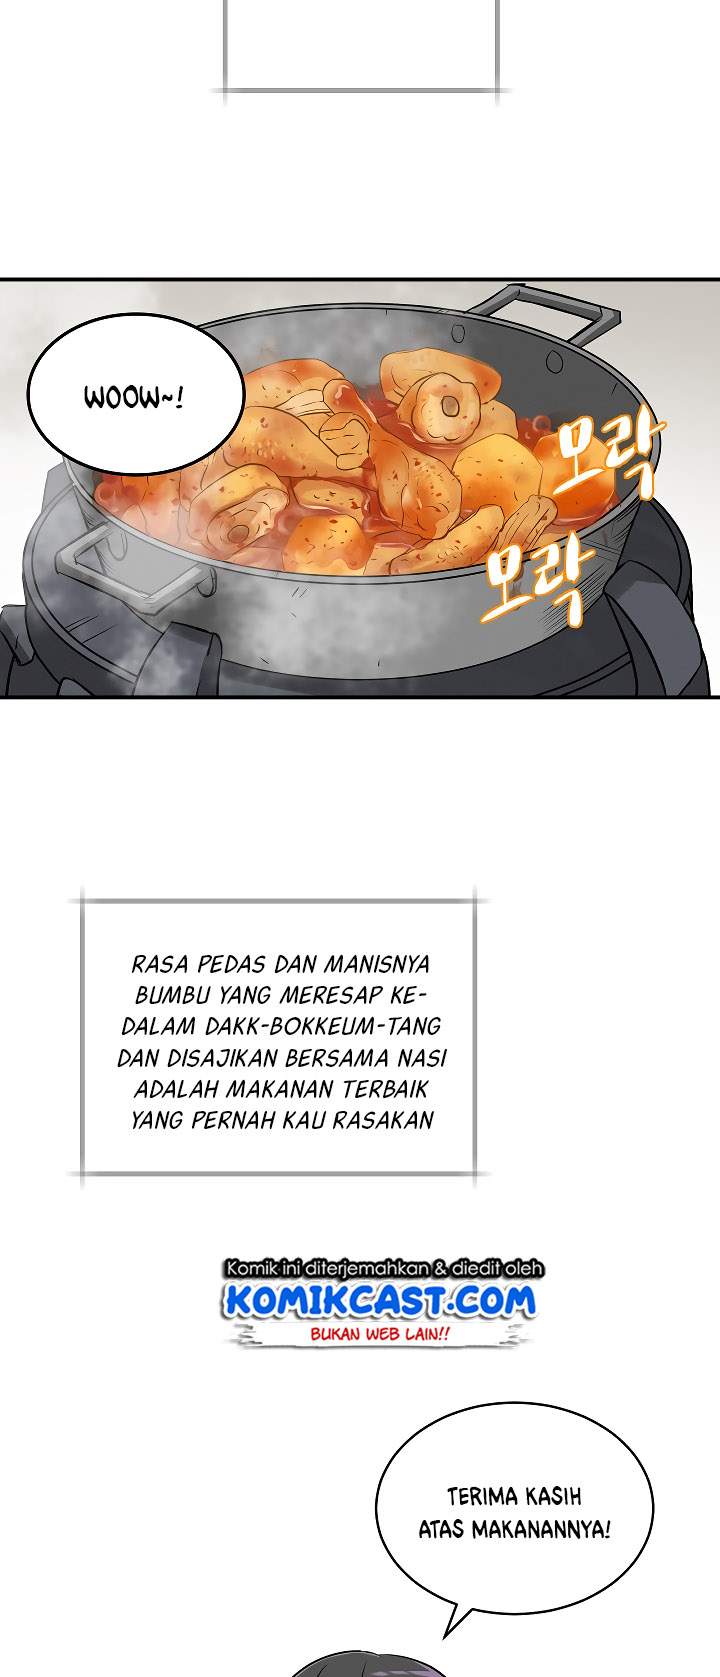 Leveling Up, By Only Eating! (Gourmet Gaming) Chapter 07 - 513